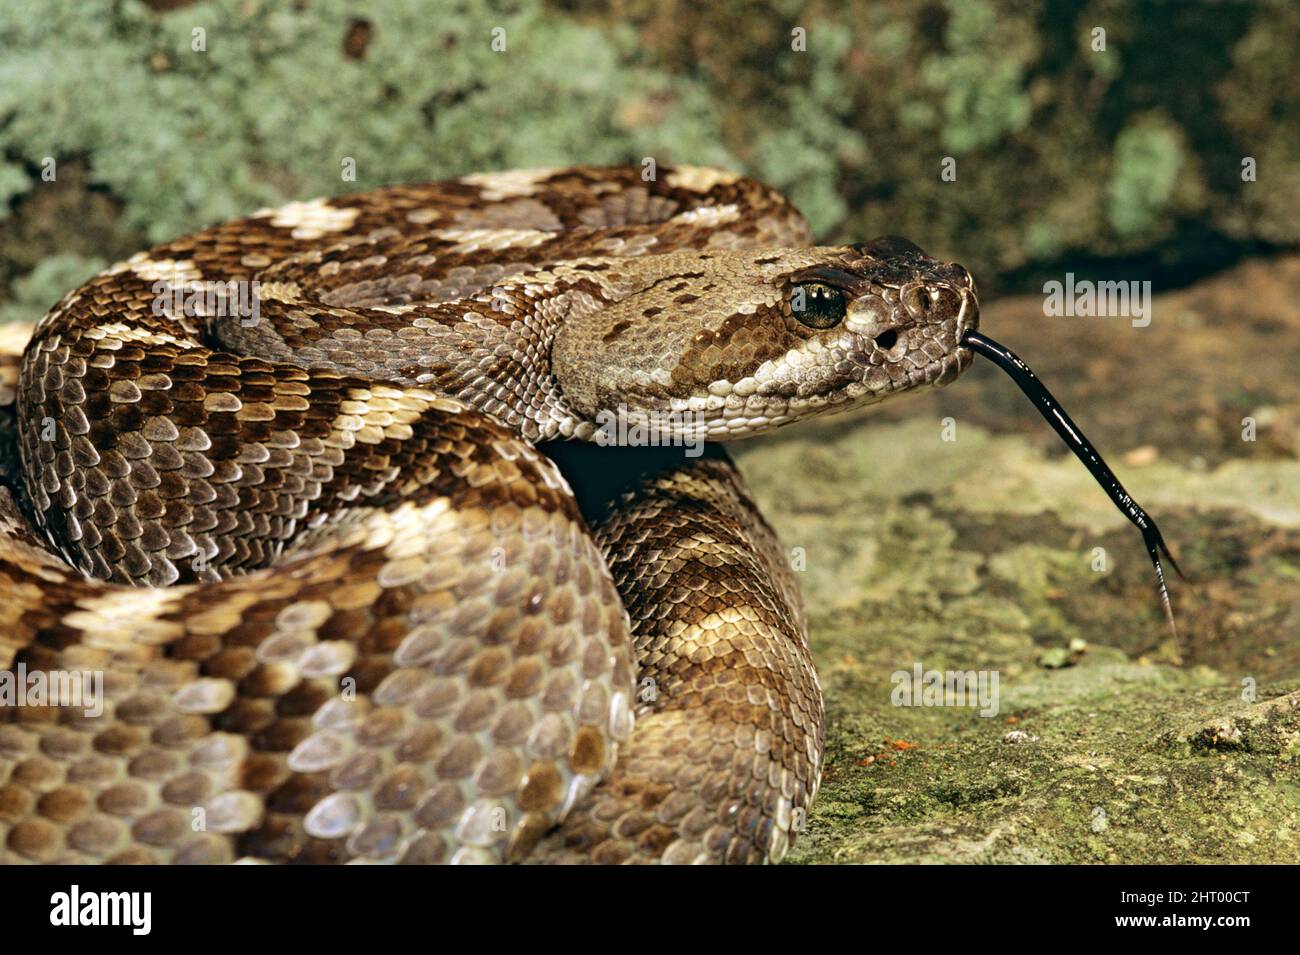 Black tailed rattlesnake (Crotalus molossus molussus), portrait with forked tongue extended. Western Texas, USA Stock Photo